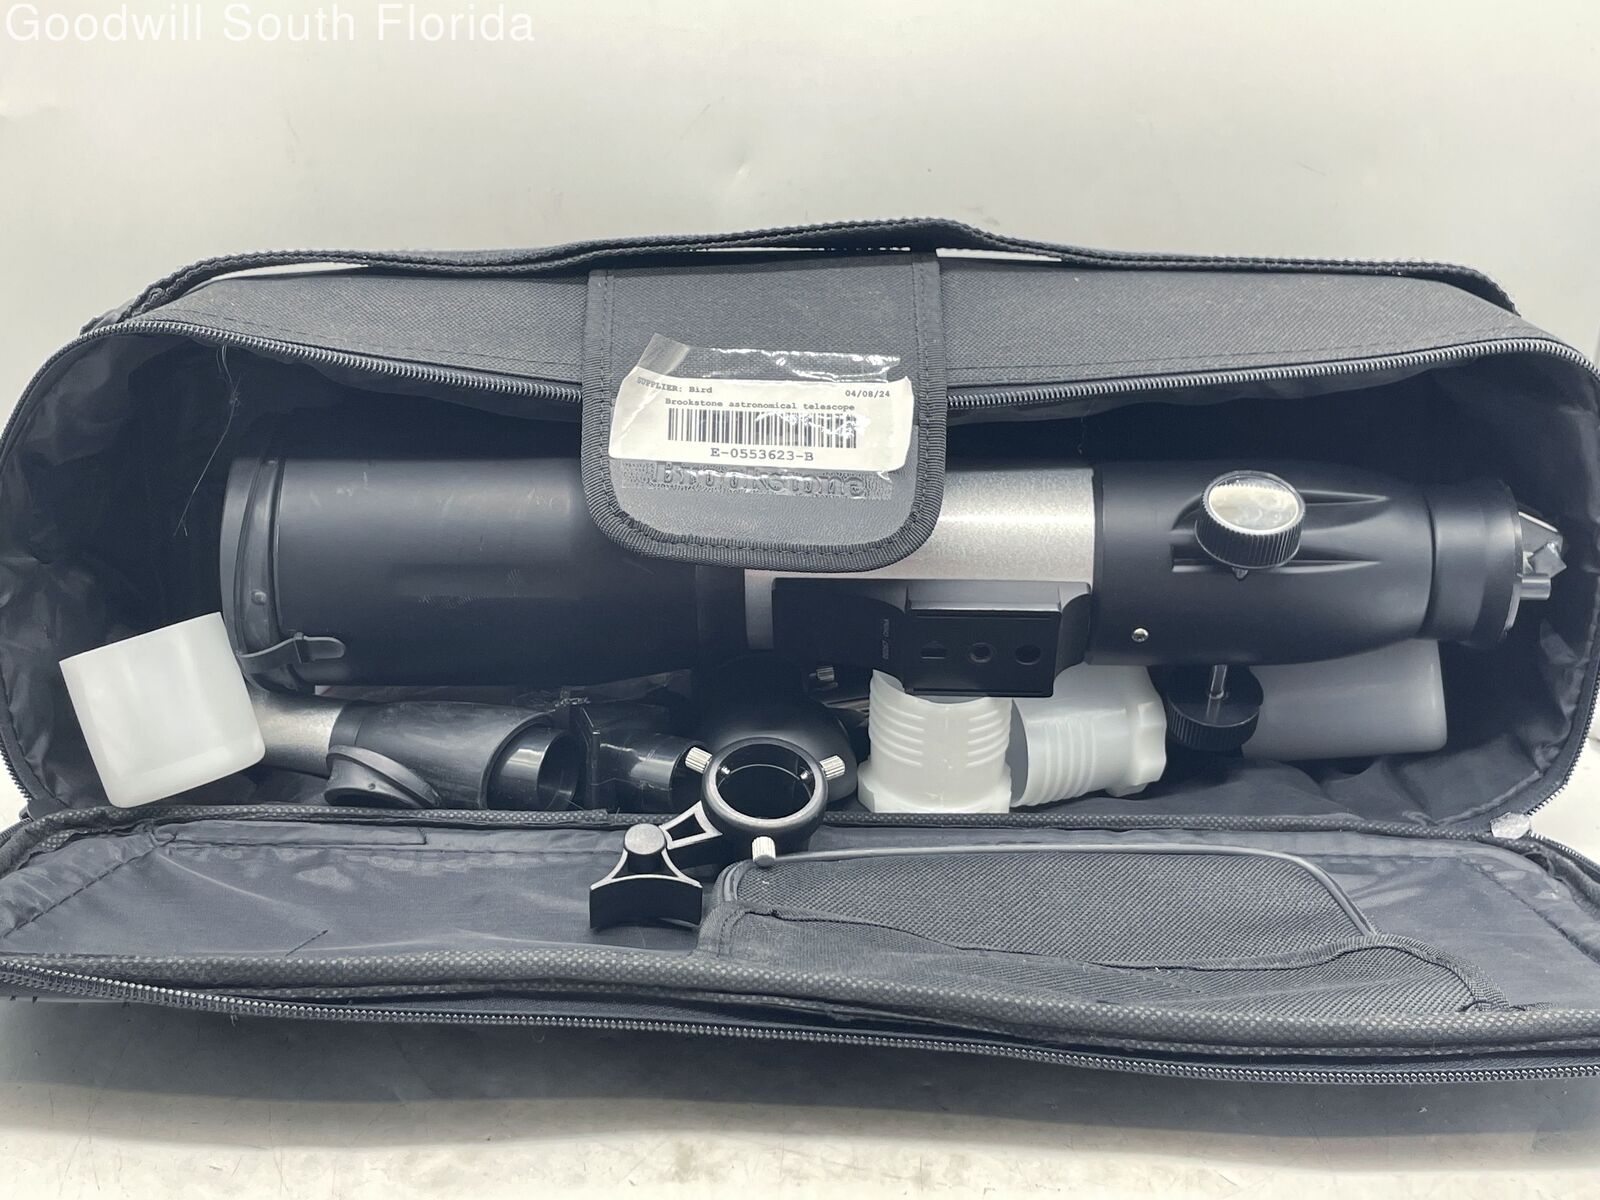 Brookstone Explore The Night Astronomical Refractor Telescope With Carrying Case